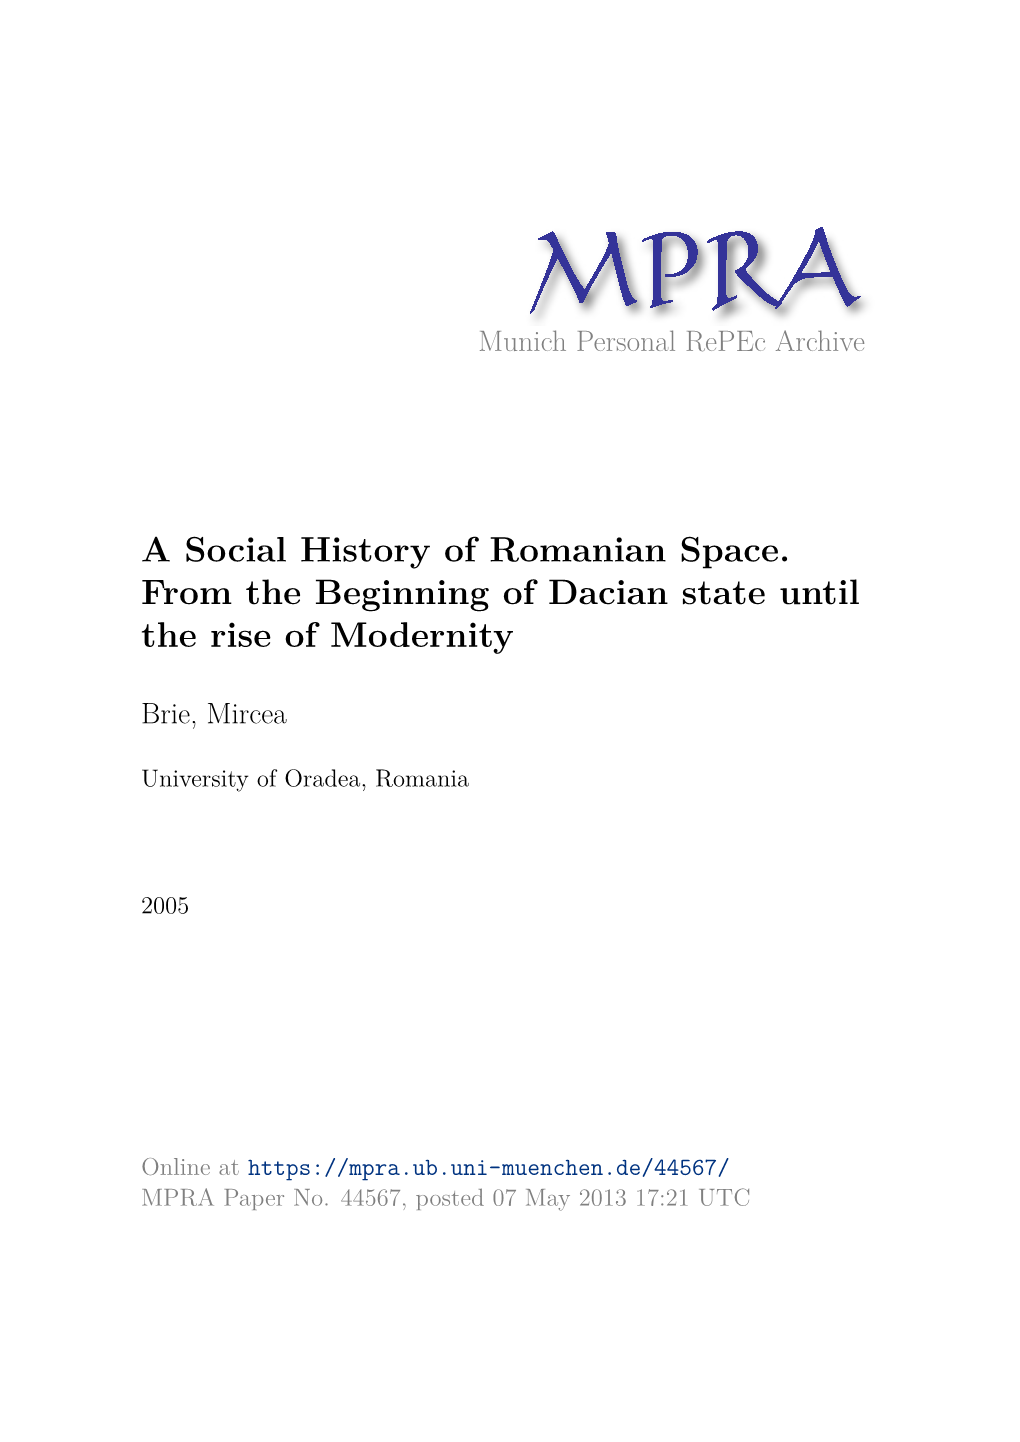 A Social History of Romanian Space. from the Beginning of Dacian State Until the Rise of Modernity